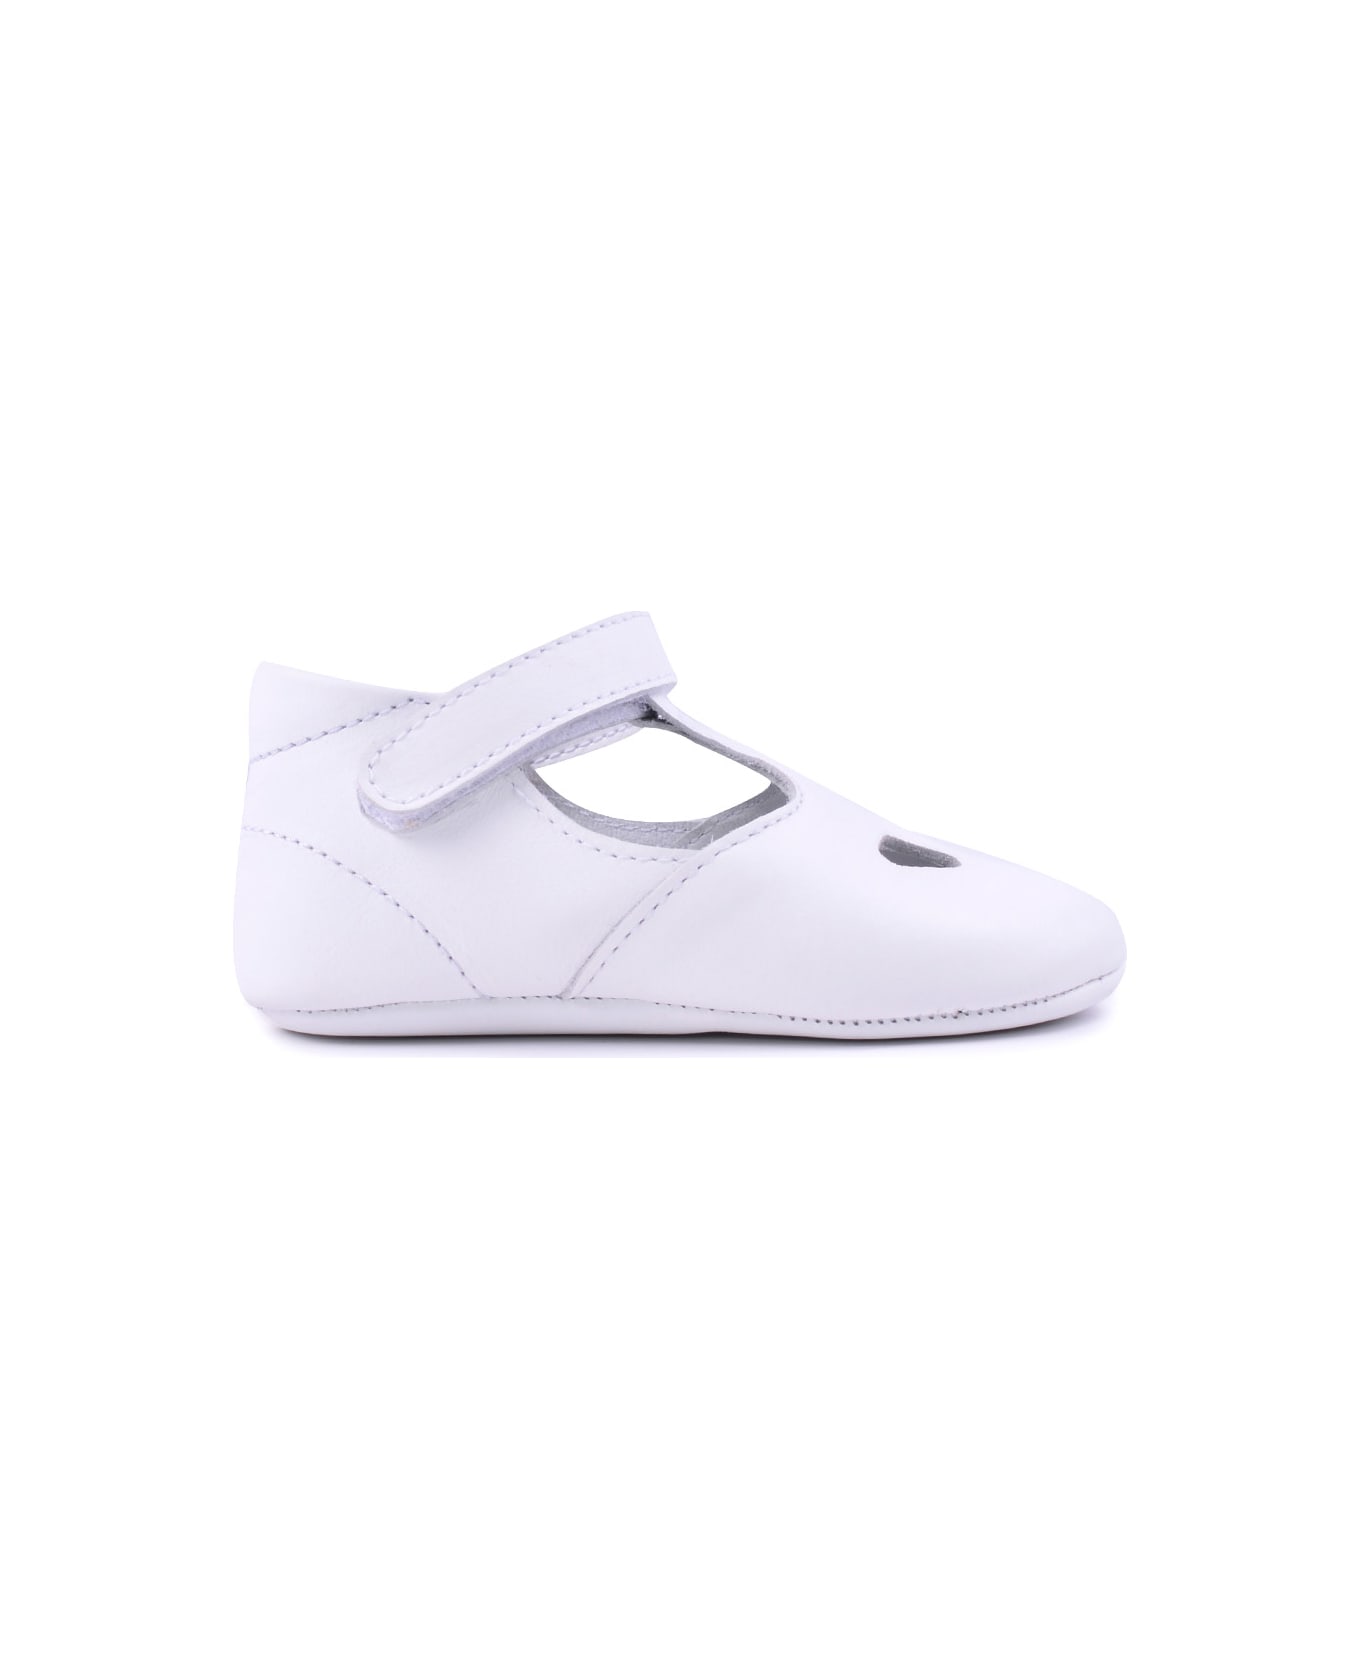 Gallucci Leather Shoes With Buckle - White